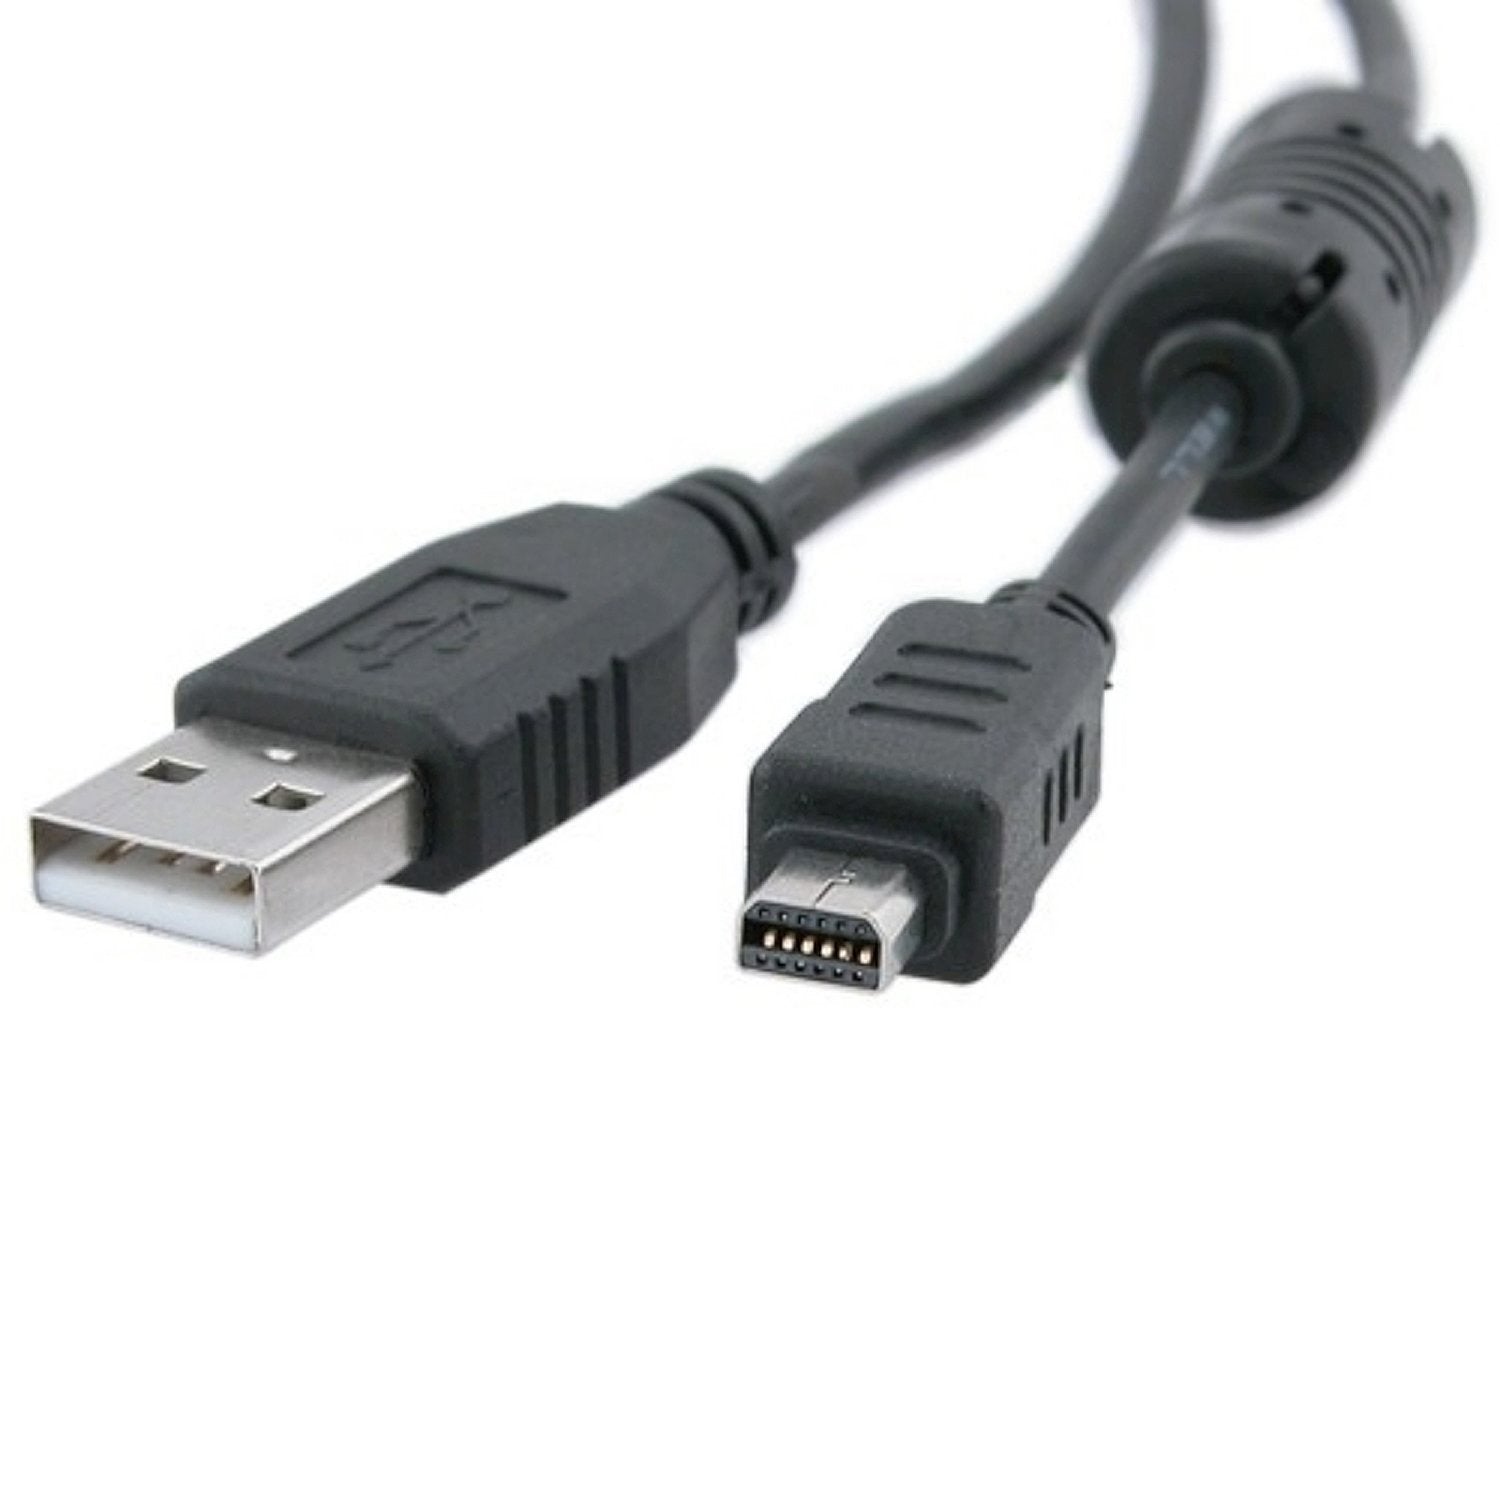 USB cable for Olympus D-435